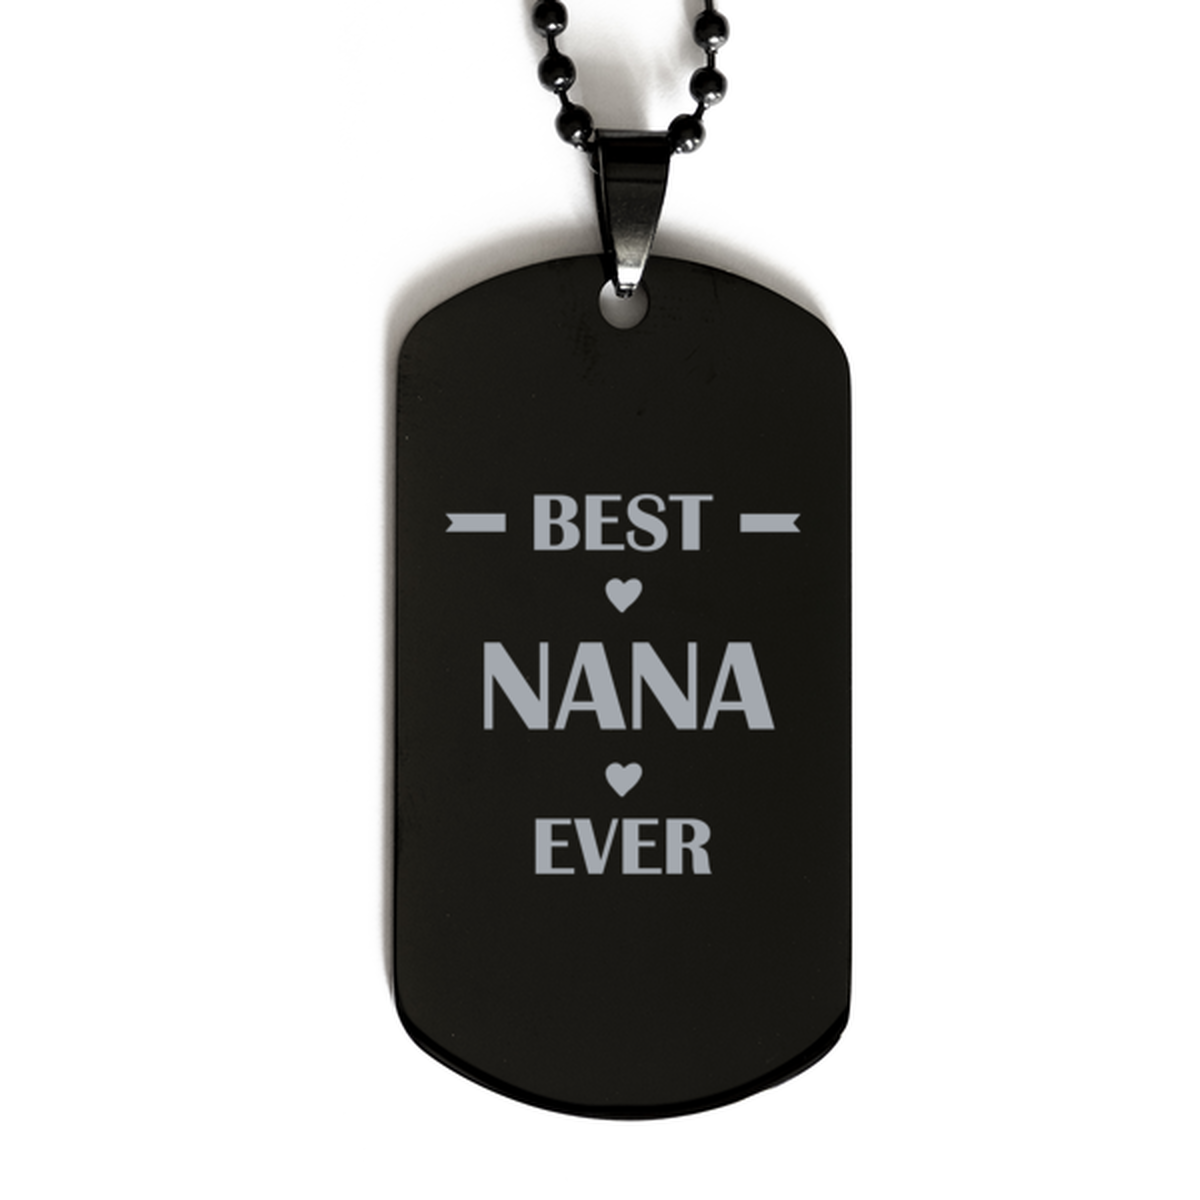 Best Nana Ever Nana Gifts, Funny Black Dog Tag For Nana, Birthday Family Presents Engraved Necklace For Women